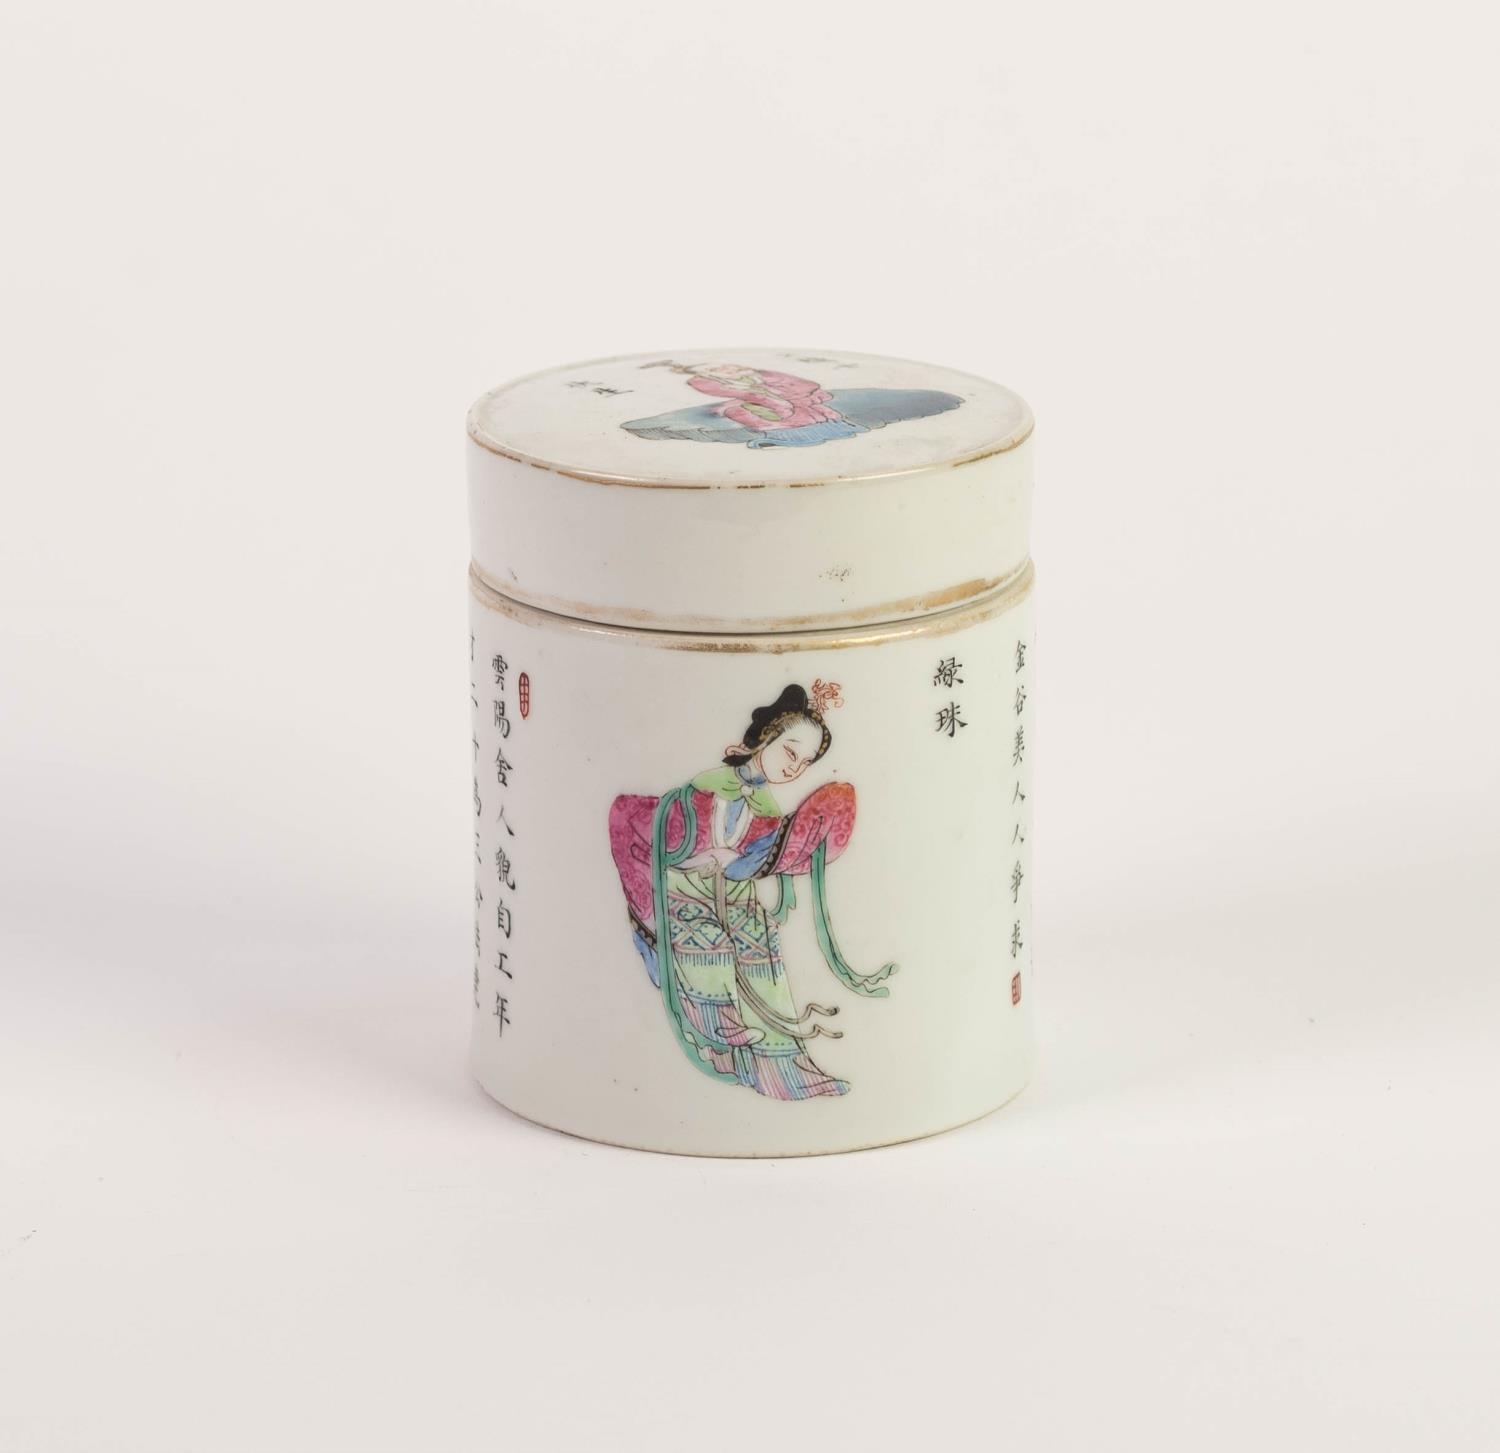 CHINESE QING DYNASTY PORCELAIN CYLINDRICAL LIDDED CANISTER, painted in famille rose enamels, the